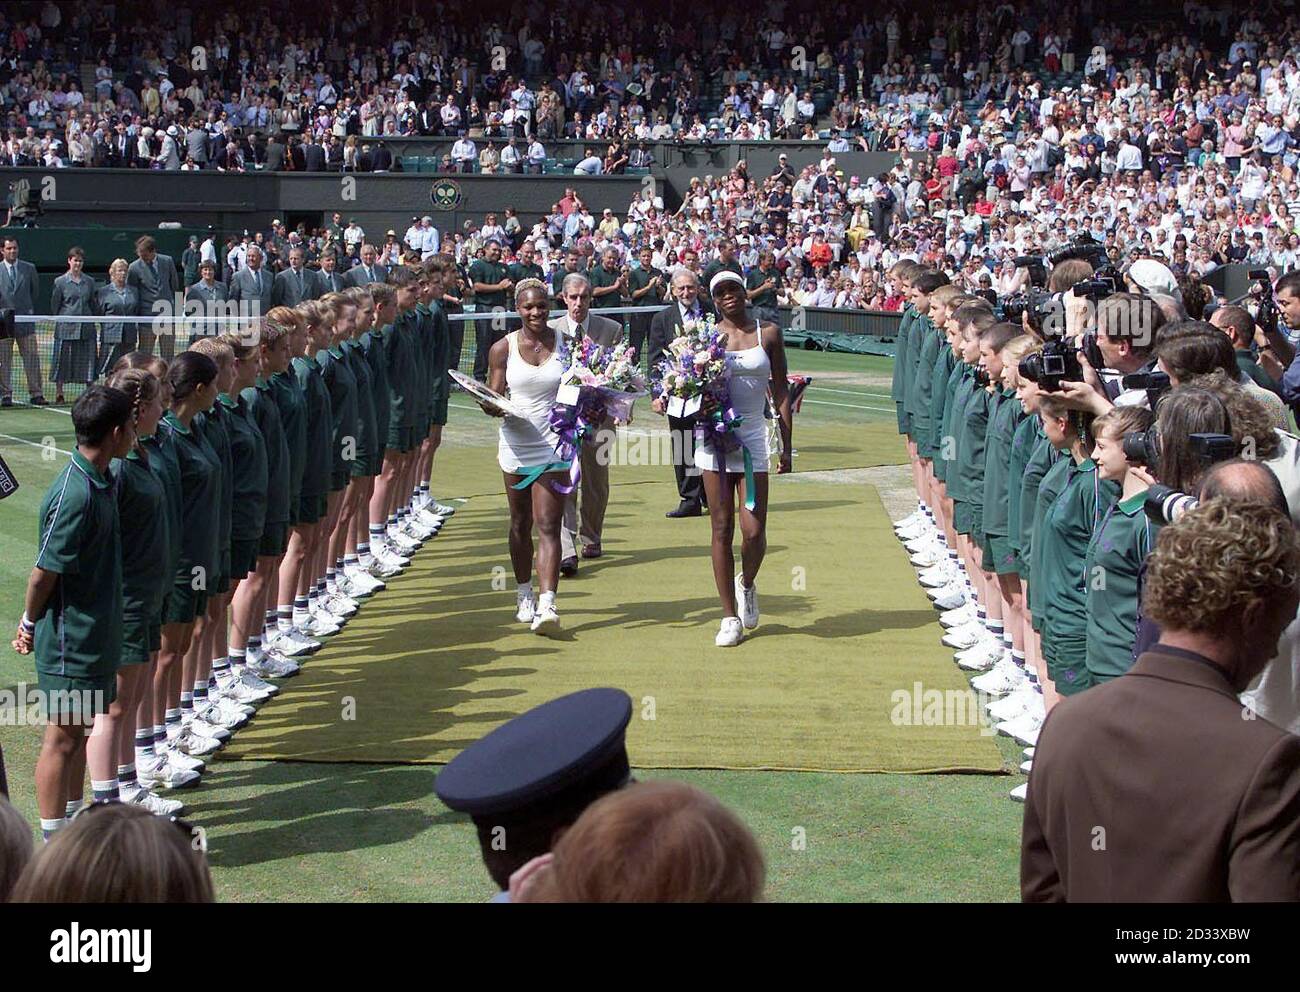 EDITORIAL USE ONLY, NO COMMERCIAL USE. Serena Williams (left) and her sister Venus from the USA leave Centre Court after making history as the first sisters to meet in the Ladies' Singles Final at Wimbledon in 118 years. Serena won in straight sets 7:6/6:3.  Stock Photo